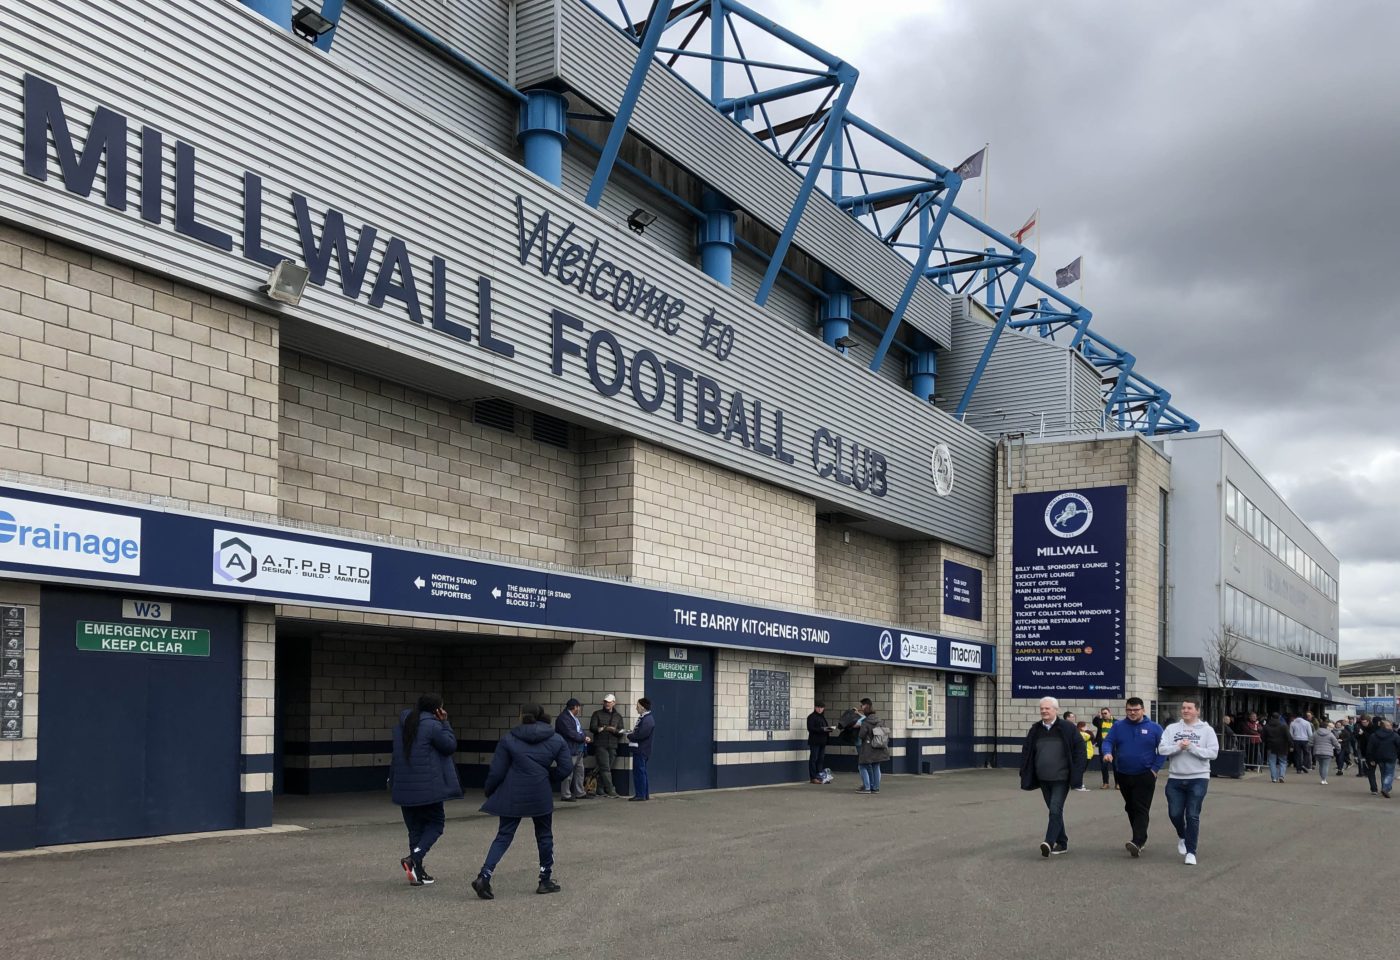 Millwall FC reveal new plans and images for proposed training